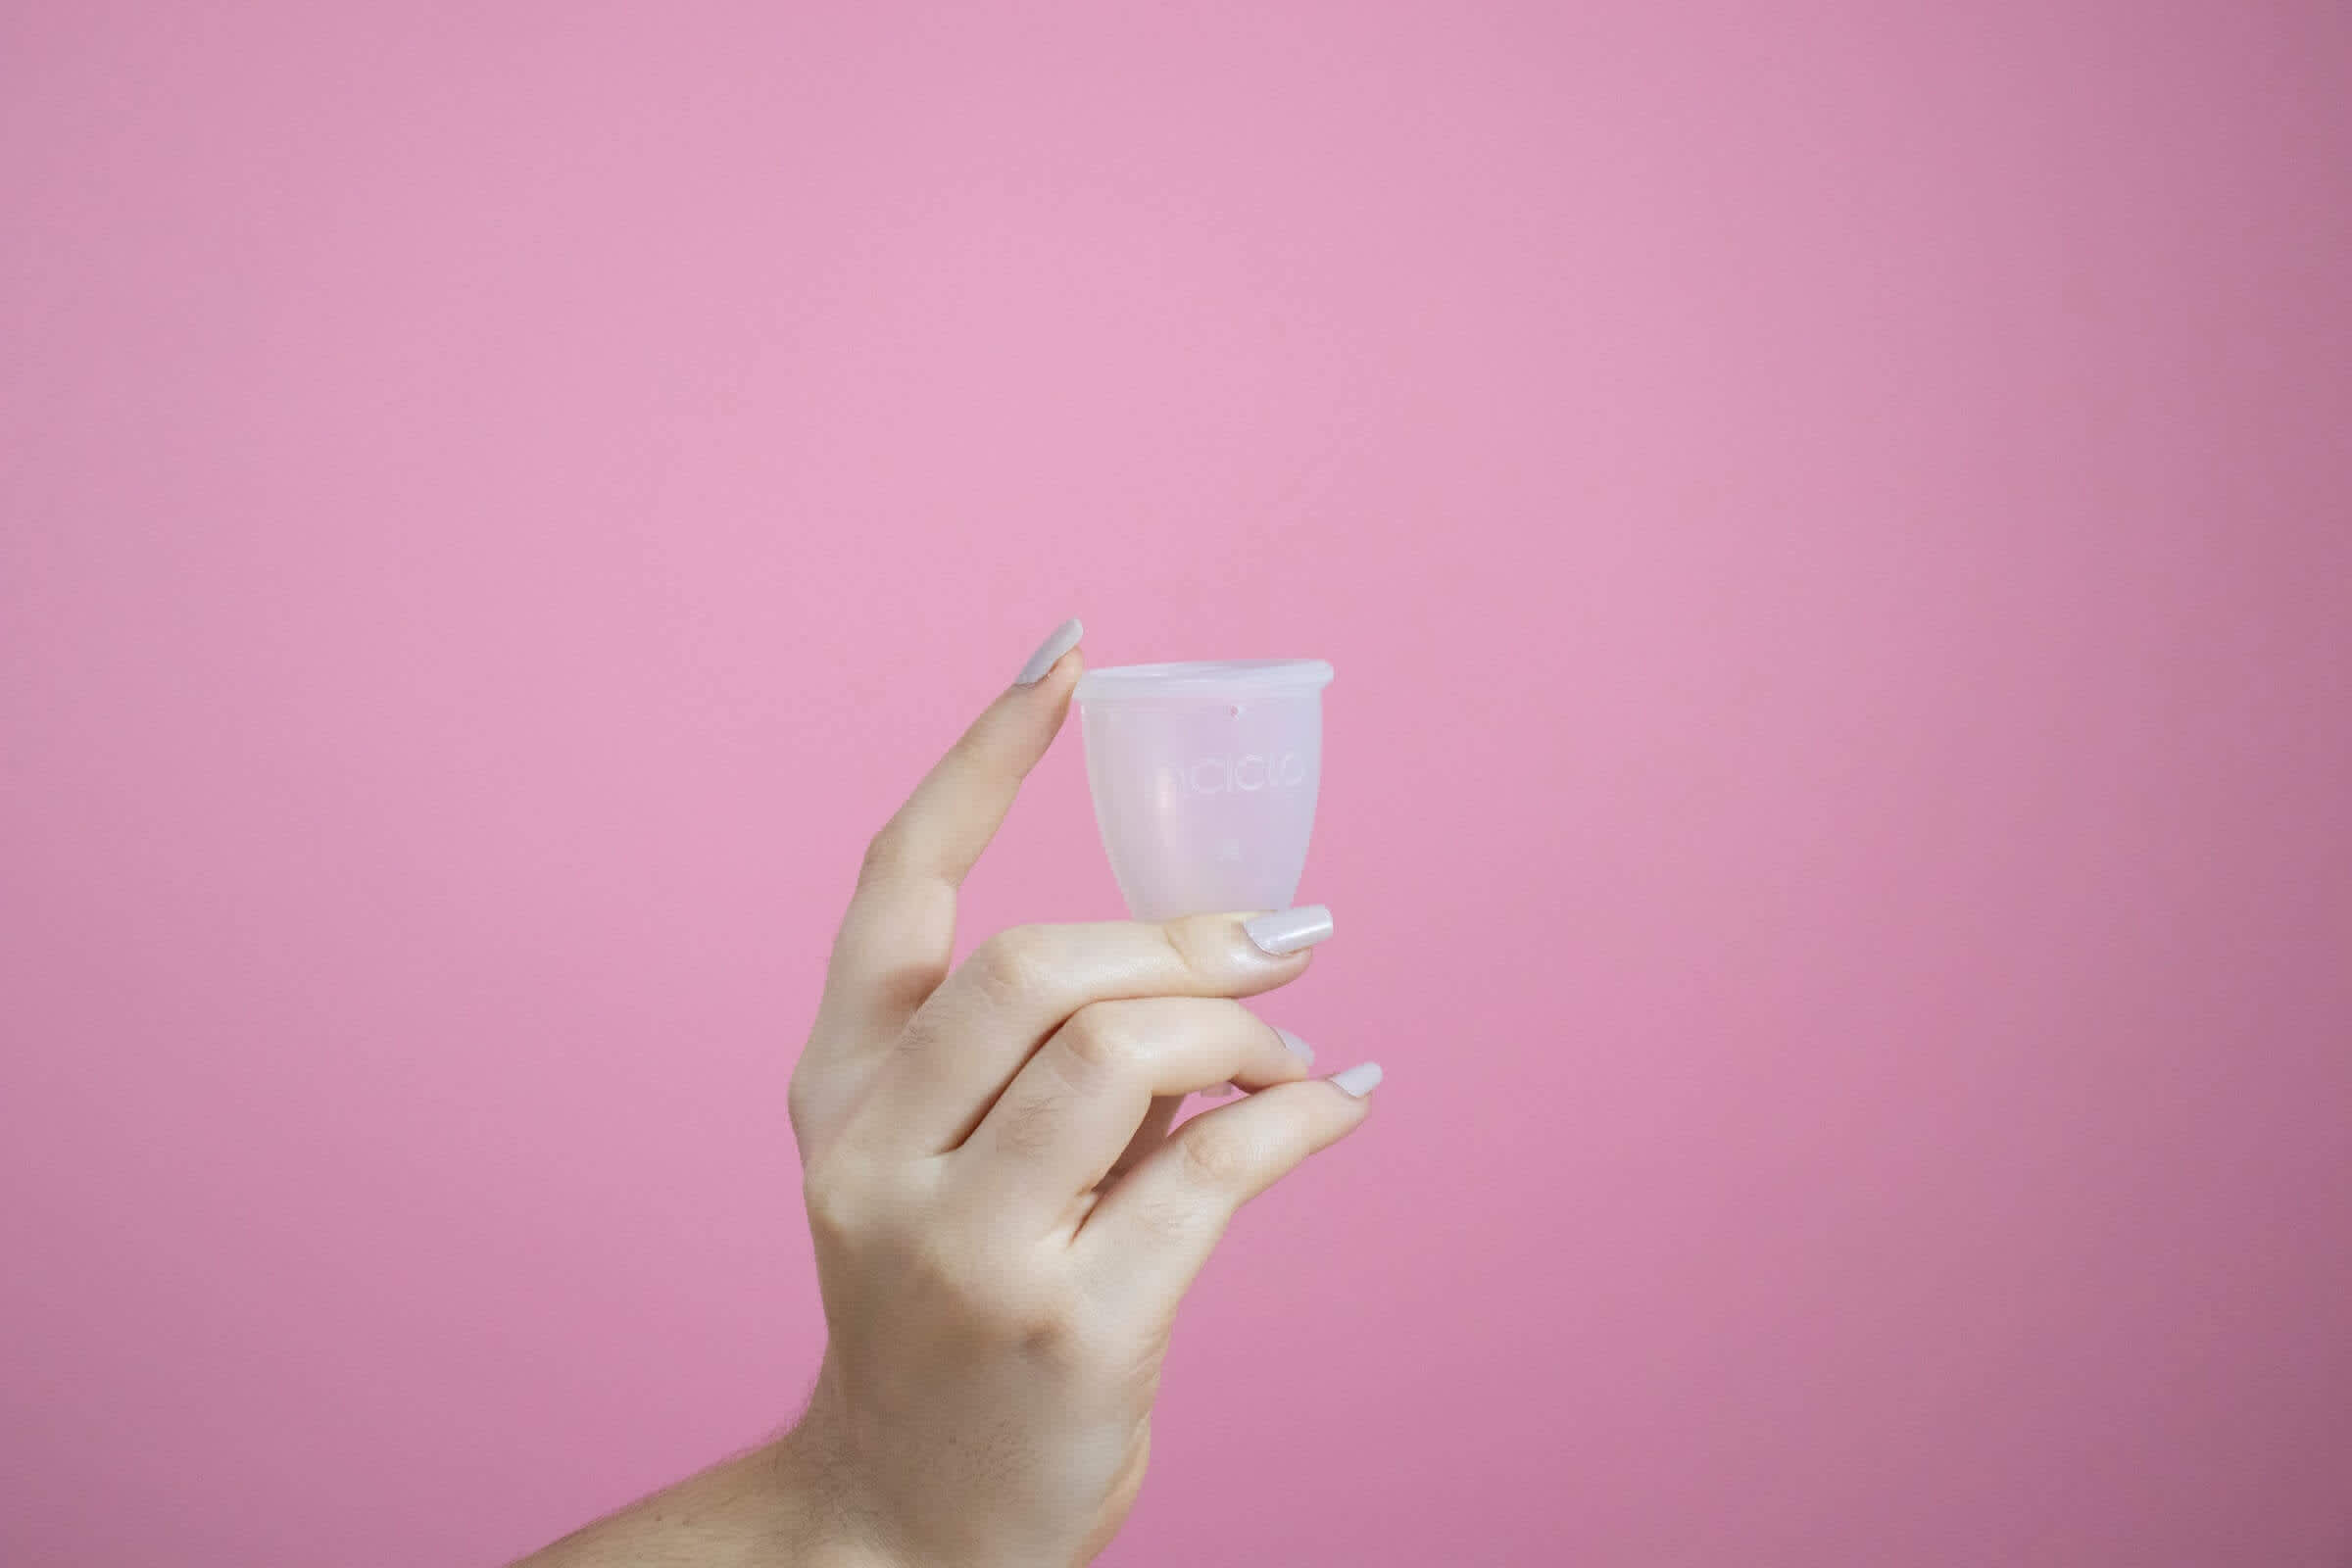 Person's hand holding clear menstrual cup with pink background